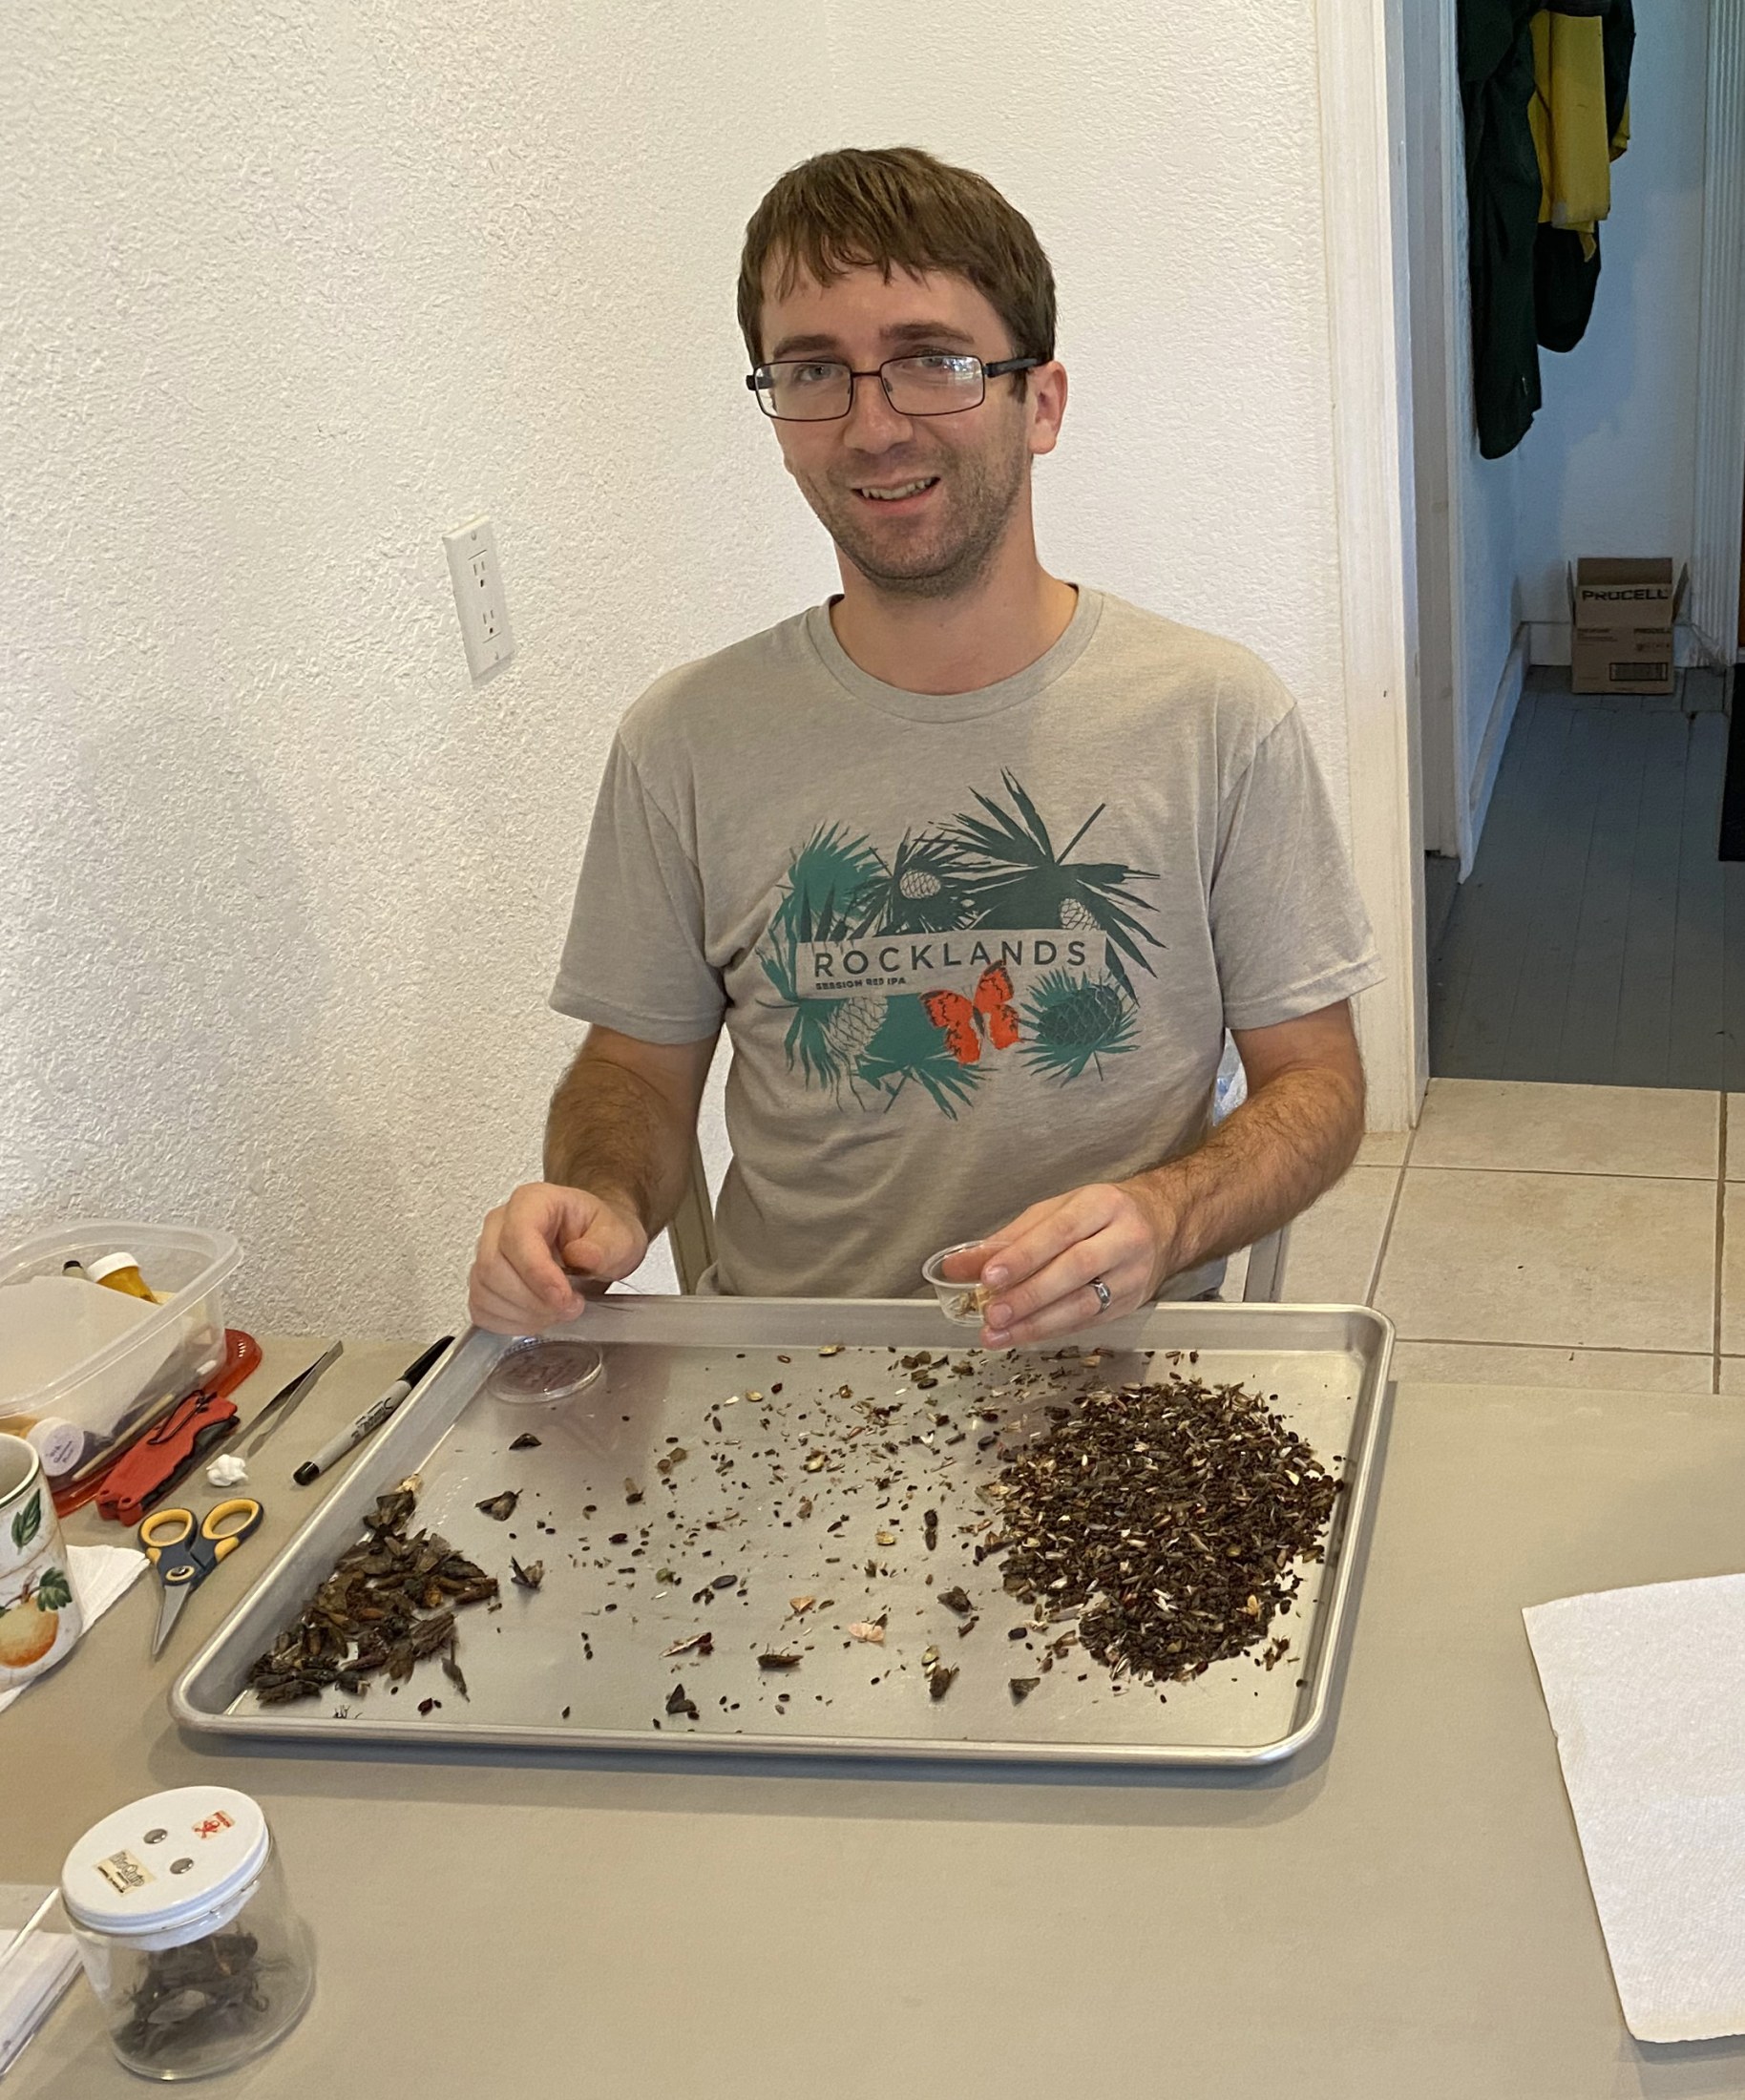 Picture of a man sorting insects on a metal tray.